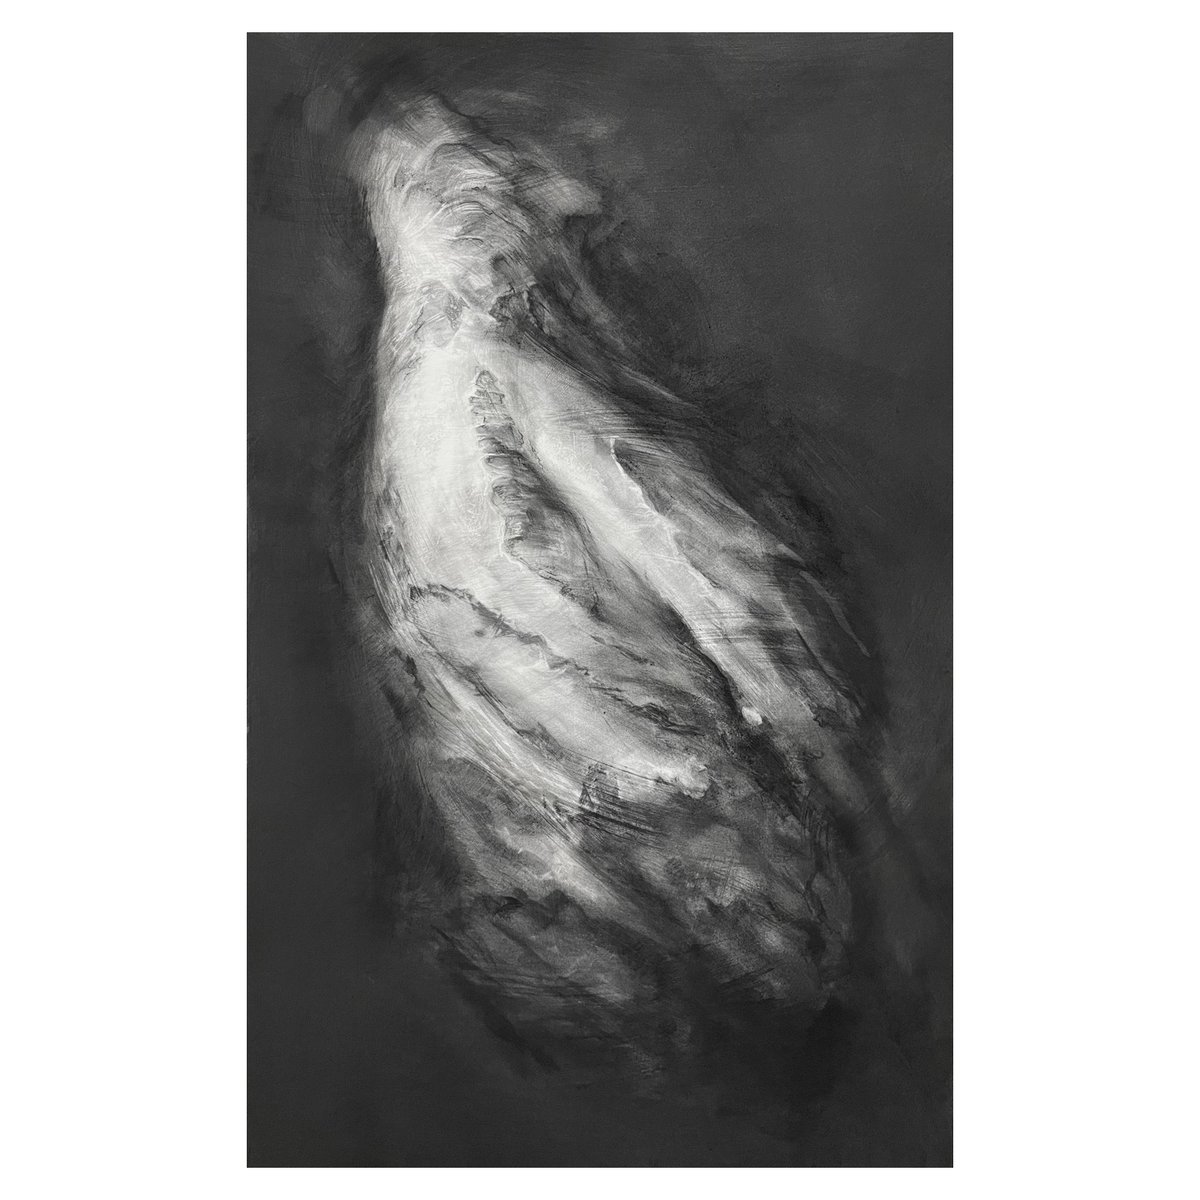 Just off the drawing board. I don't know what it's called yet but will most likely be something dynamic - there was a lot of energy to contain in this one. Untitled ghost 80x50cm Charcoal on canvas